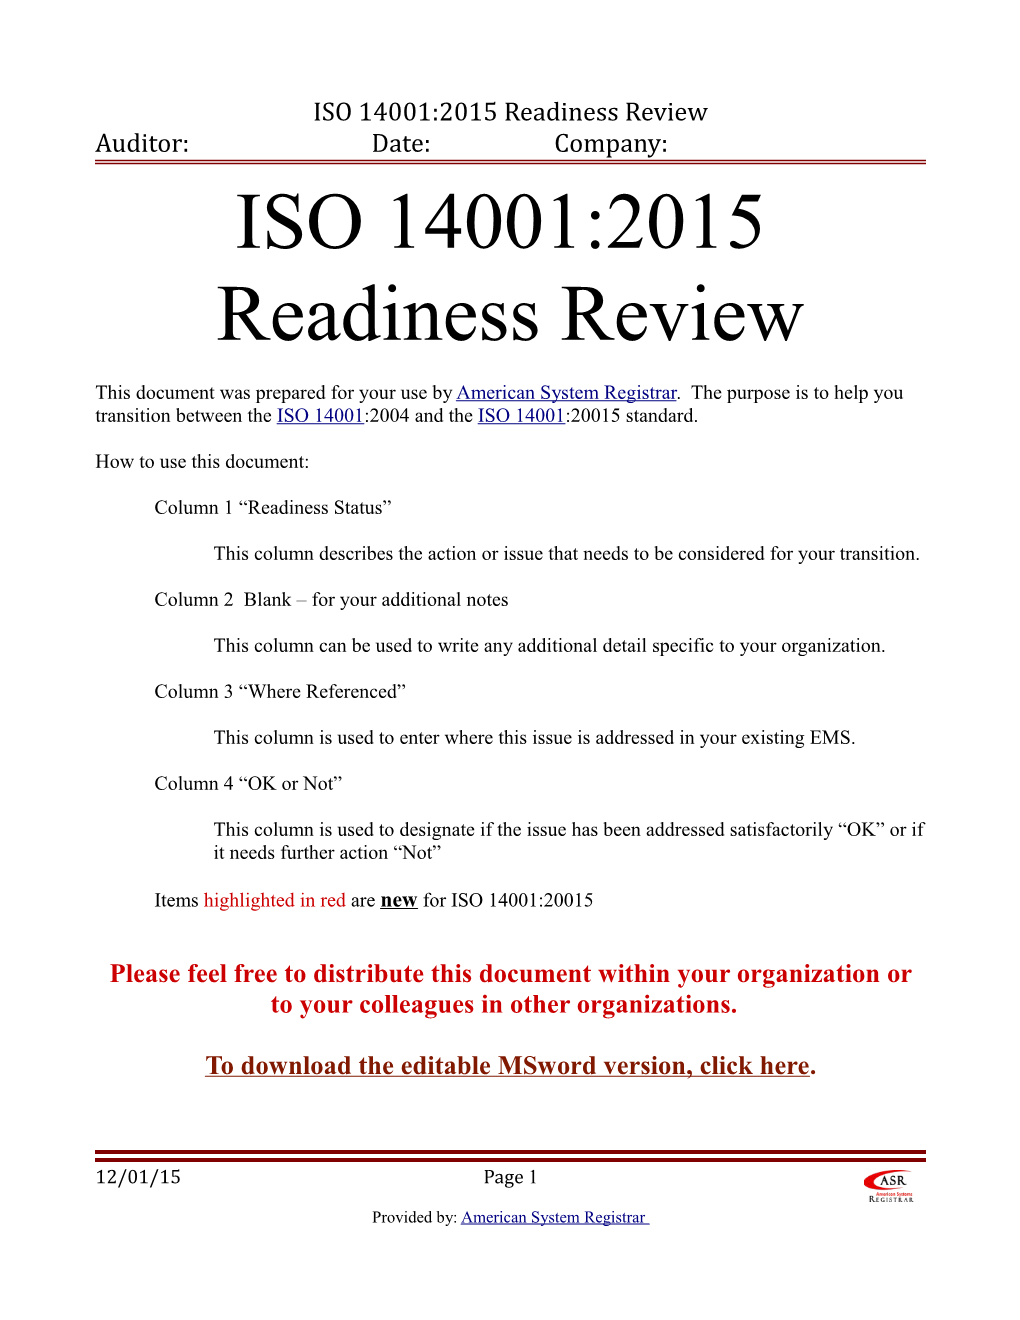 ISO 14001:2015 Readiness Review